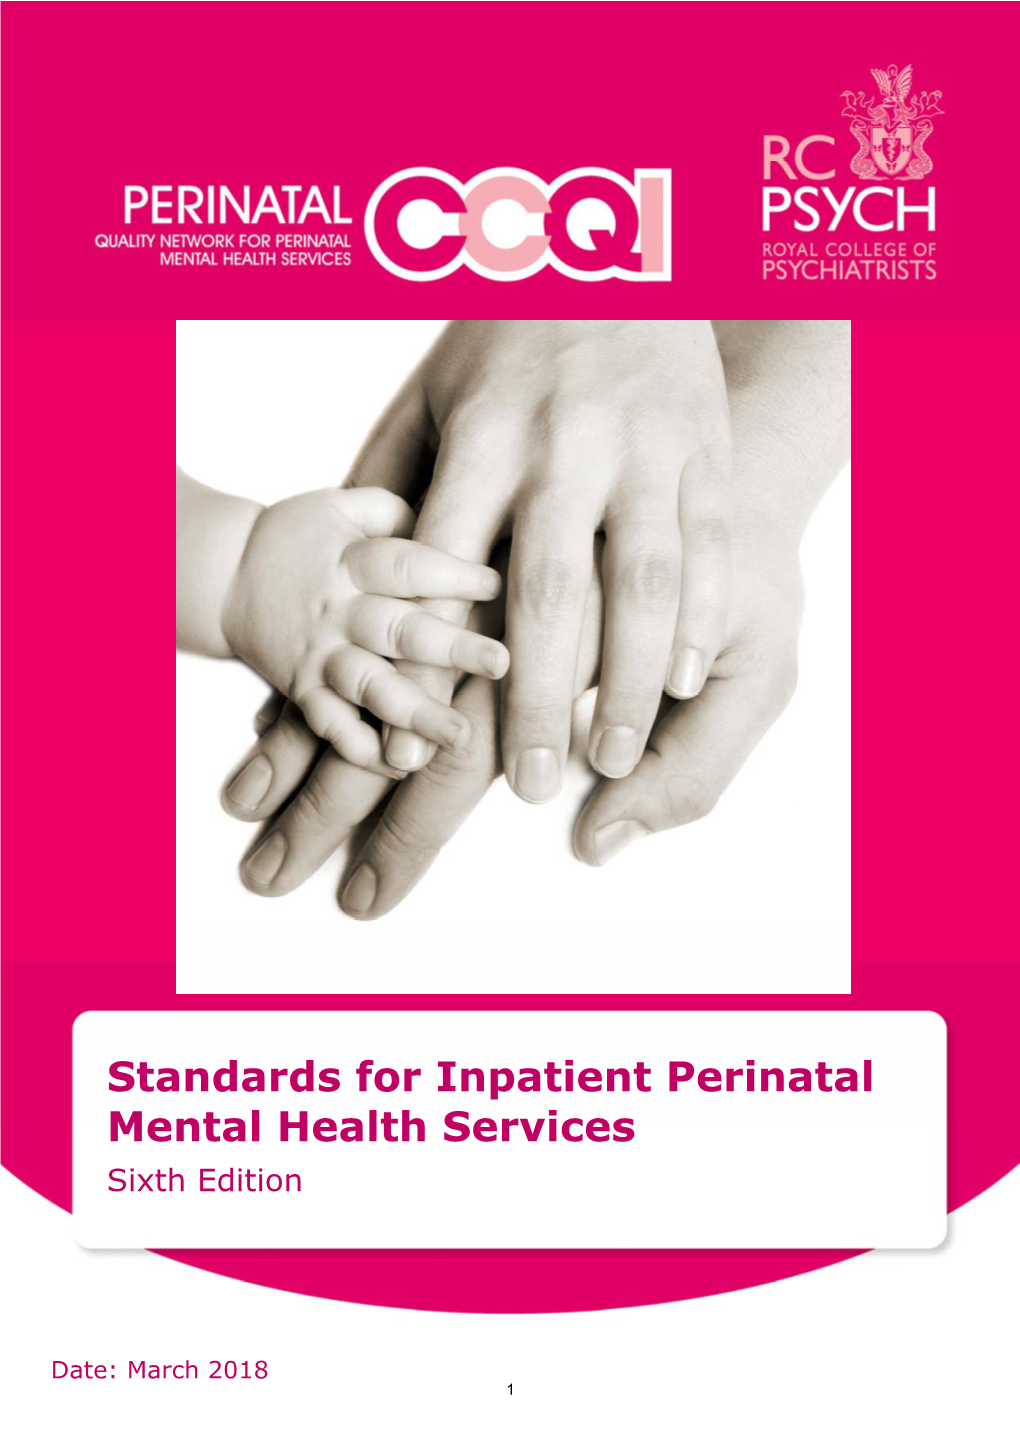 Standards for Inpatient Perinatal Mental Health Services